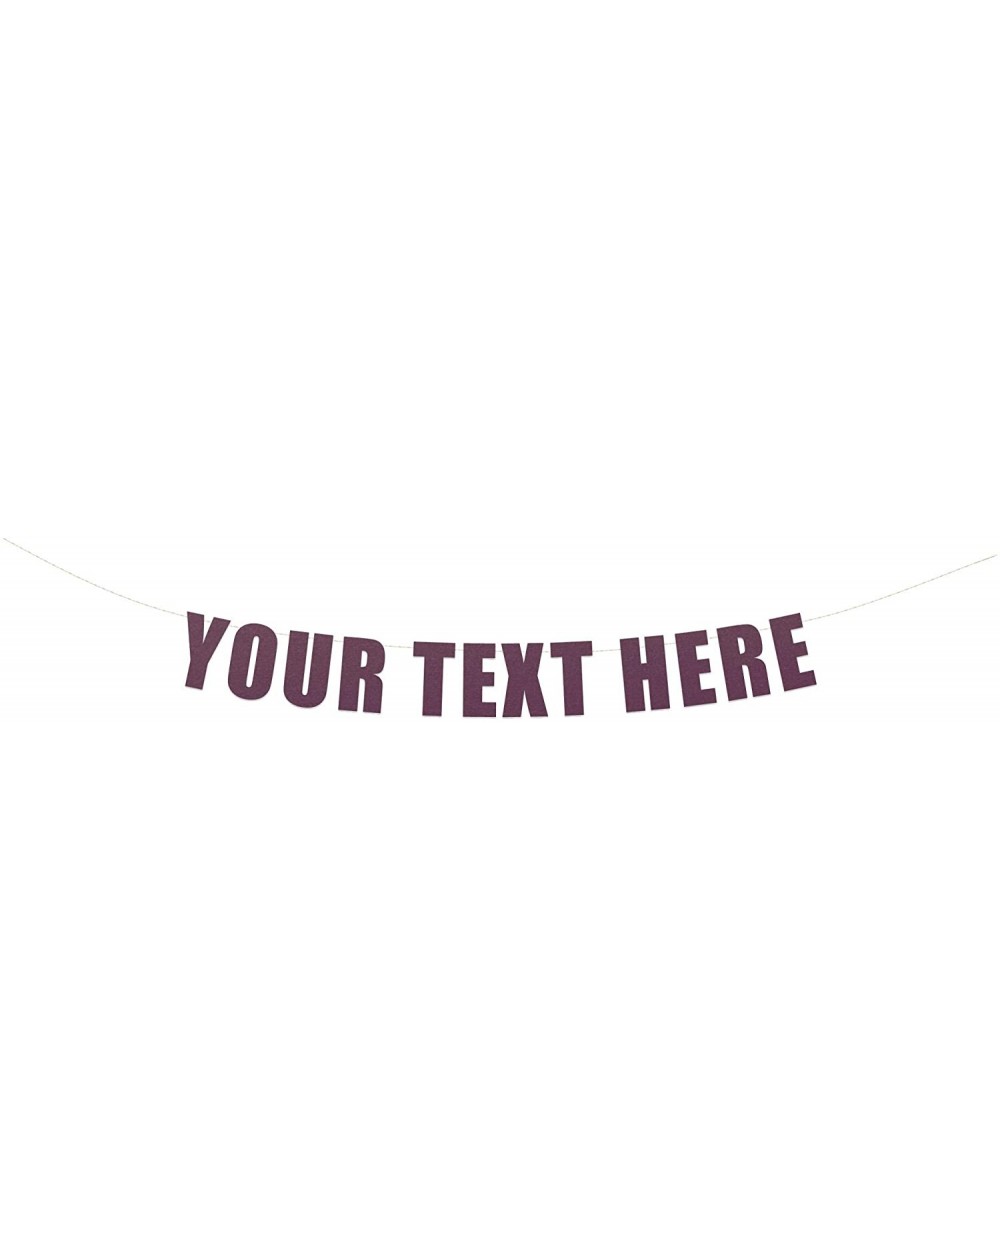 Banners & Garlands Your Text Here banner - Funny Rude Customize Your Party Banner Signs - Custom Text/Phrase Banner - Make Yo...